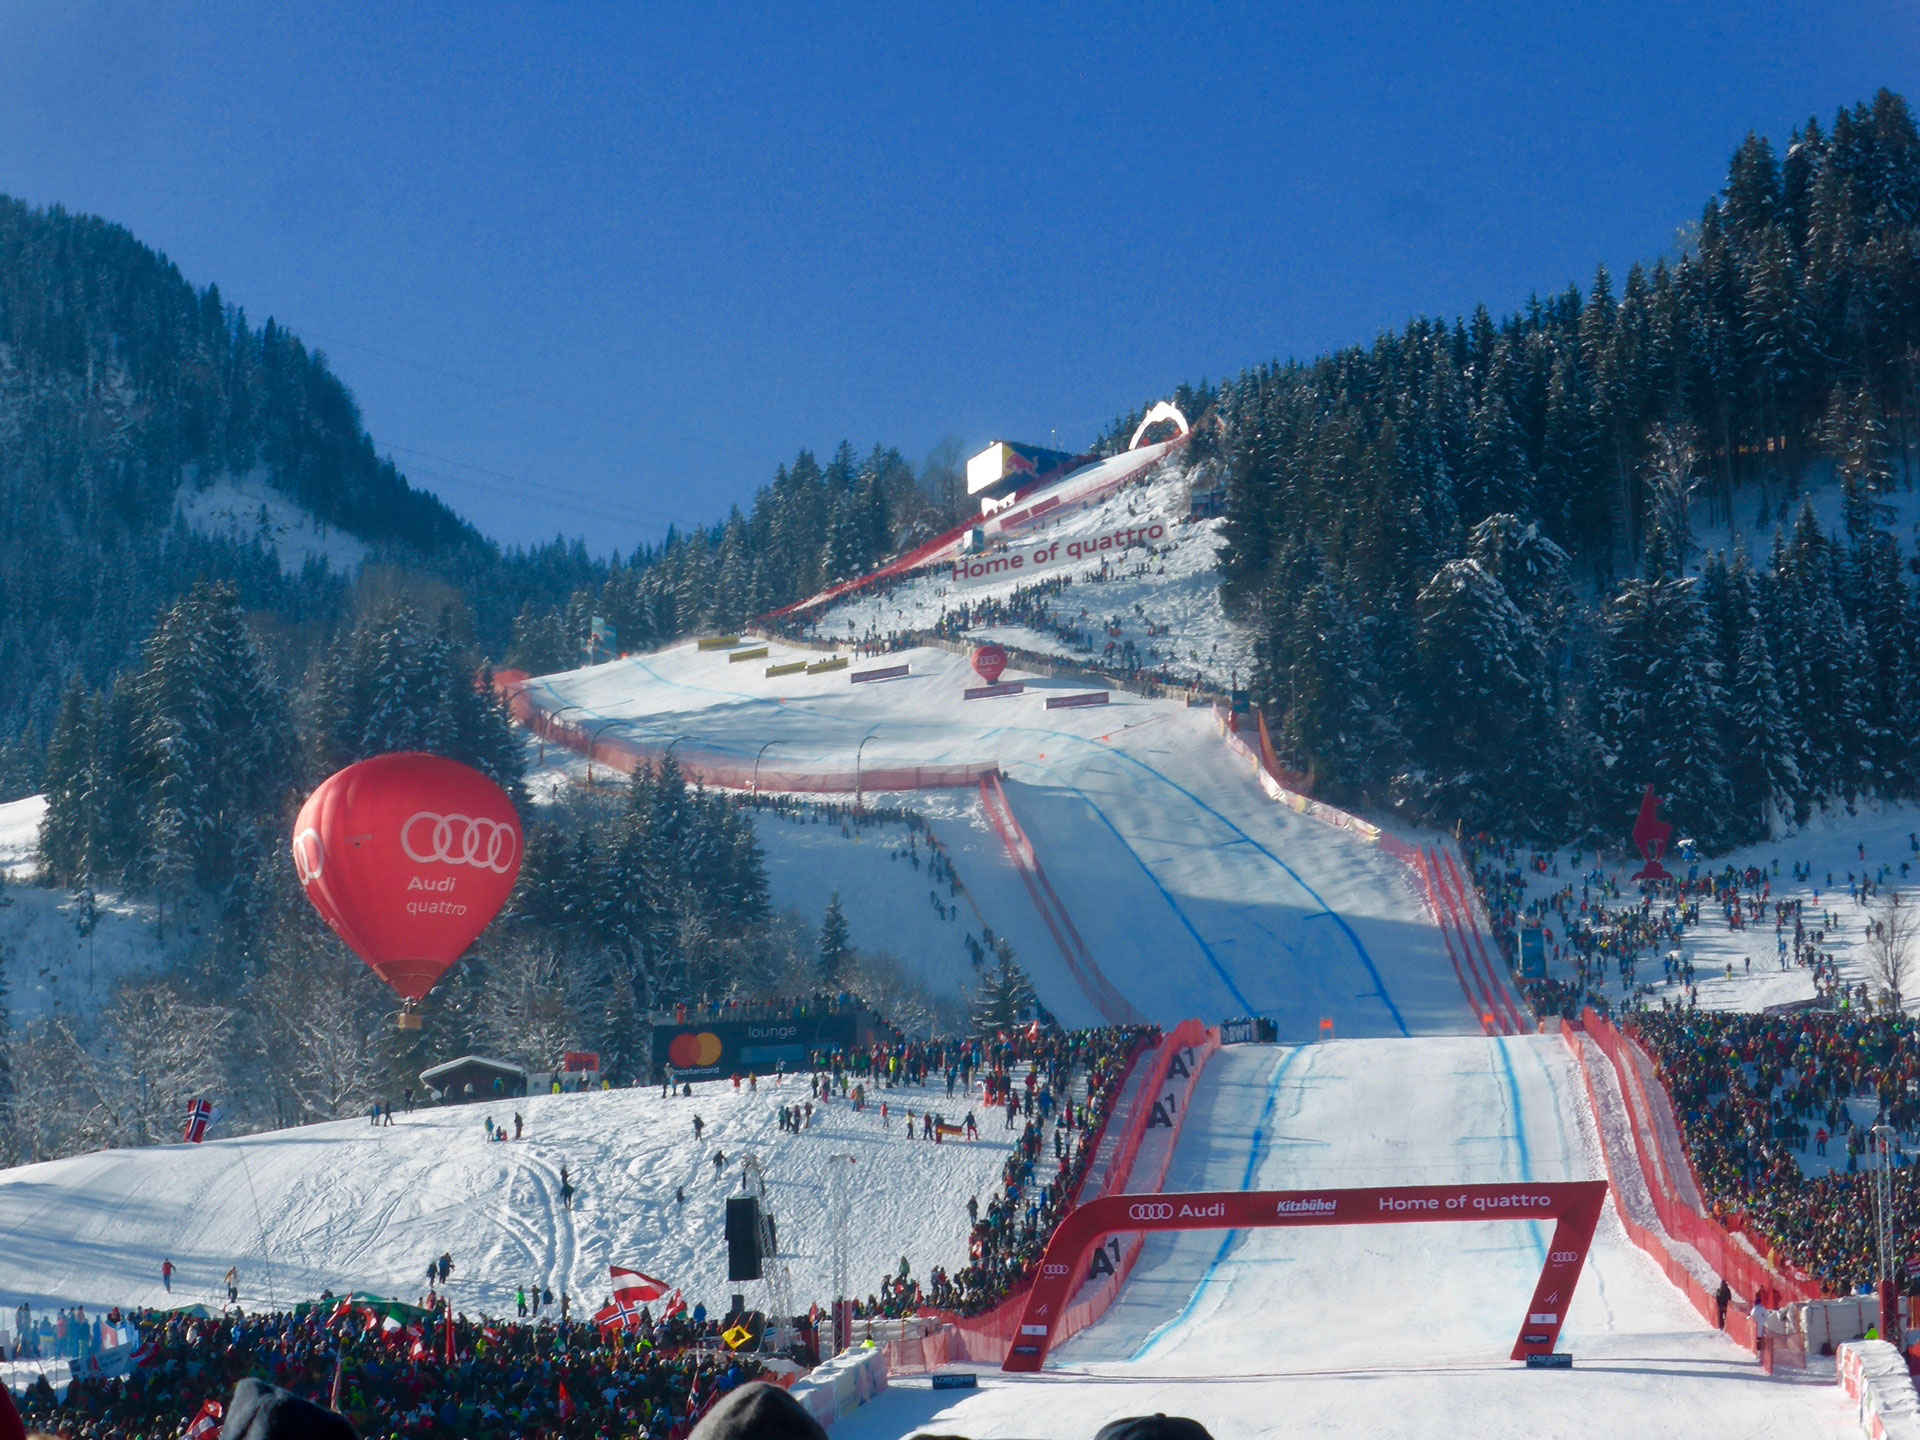 Fans pack the lower section of the Hahnenkamm downhill course in Kitzbuhel (Pinelli)